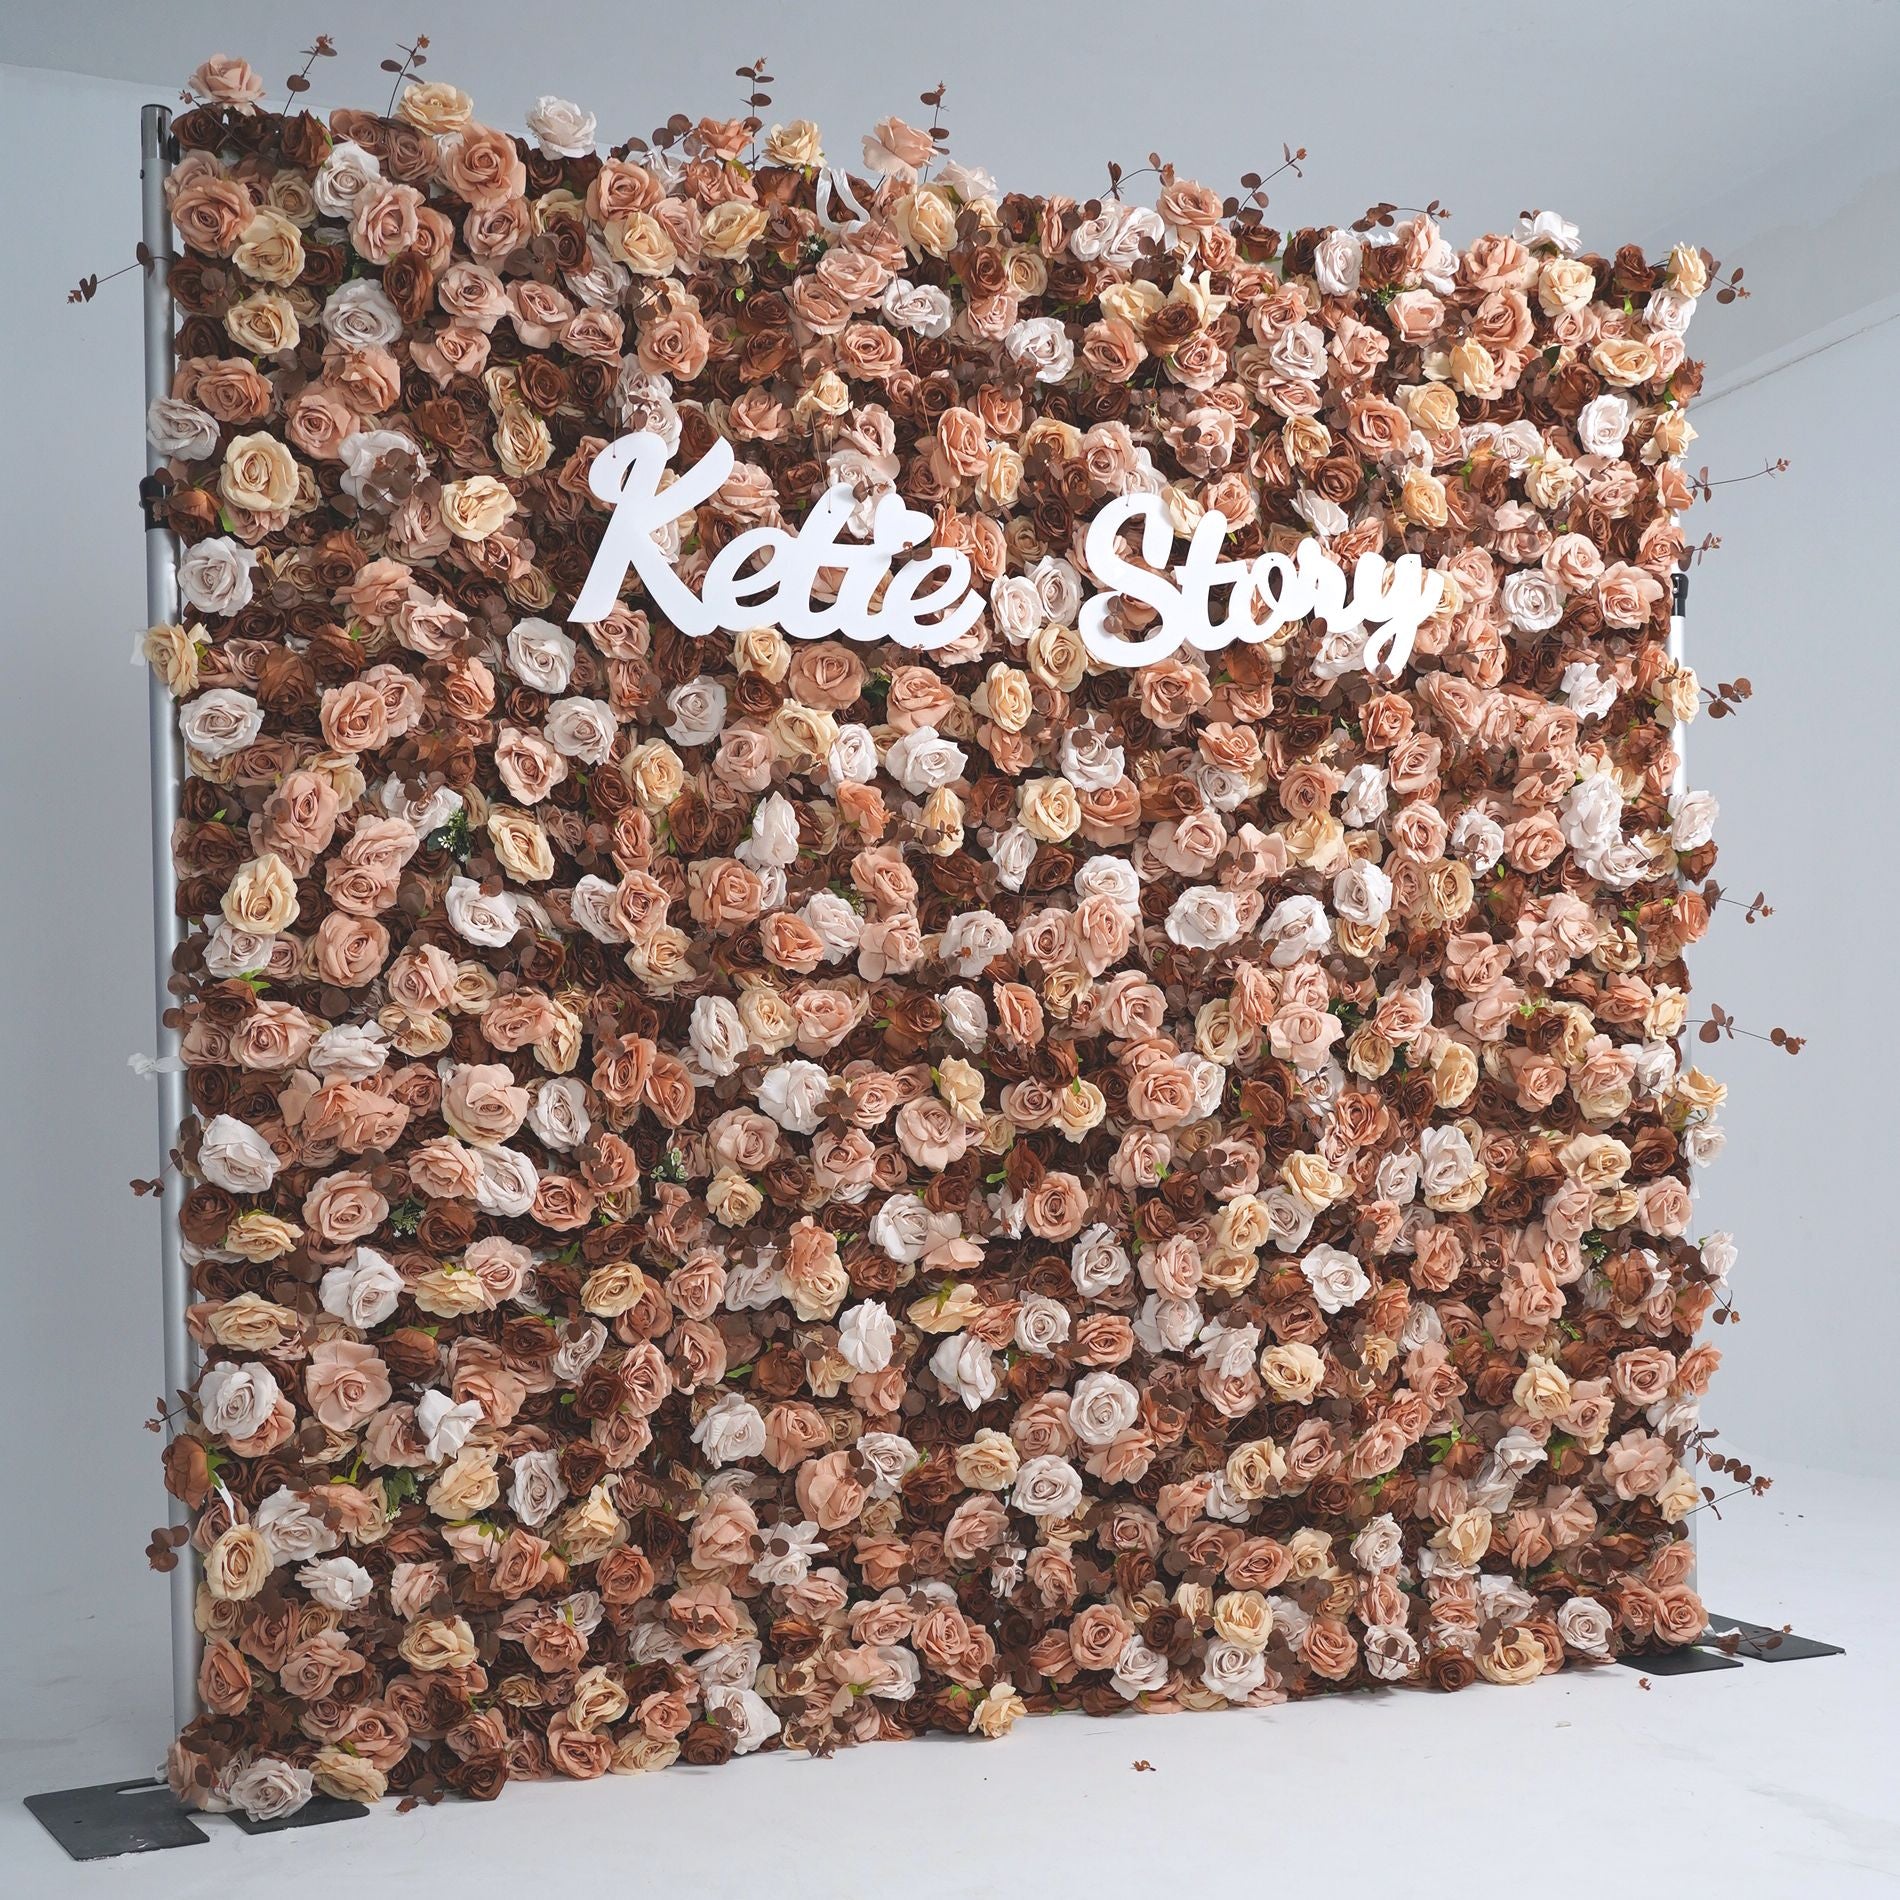 The coffee champagne flower wall backdrop looks romantic.